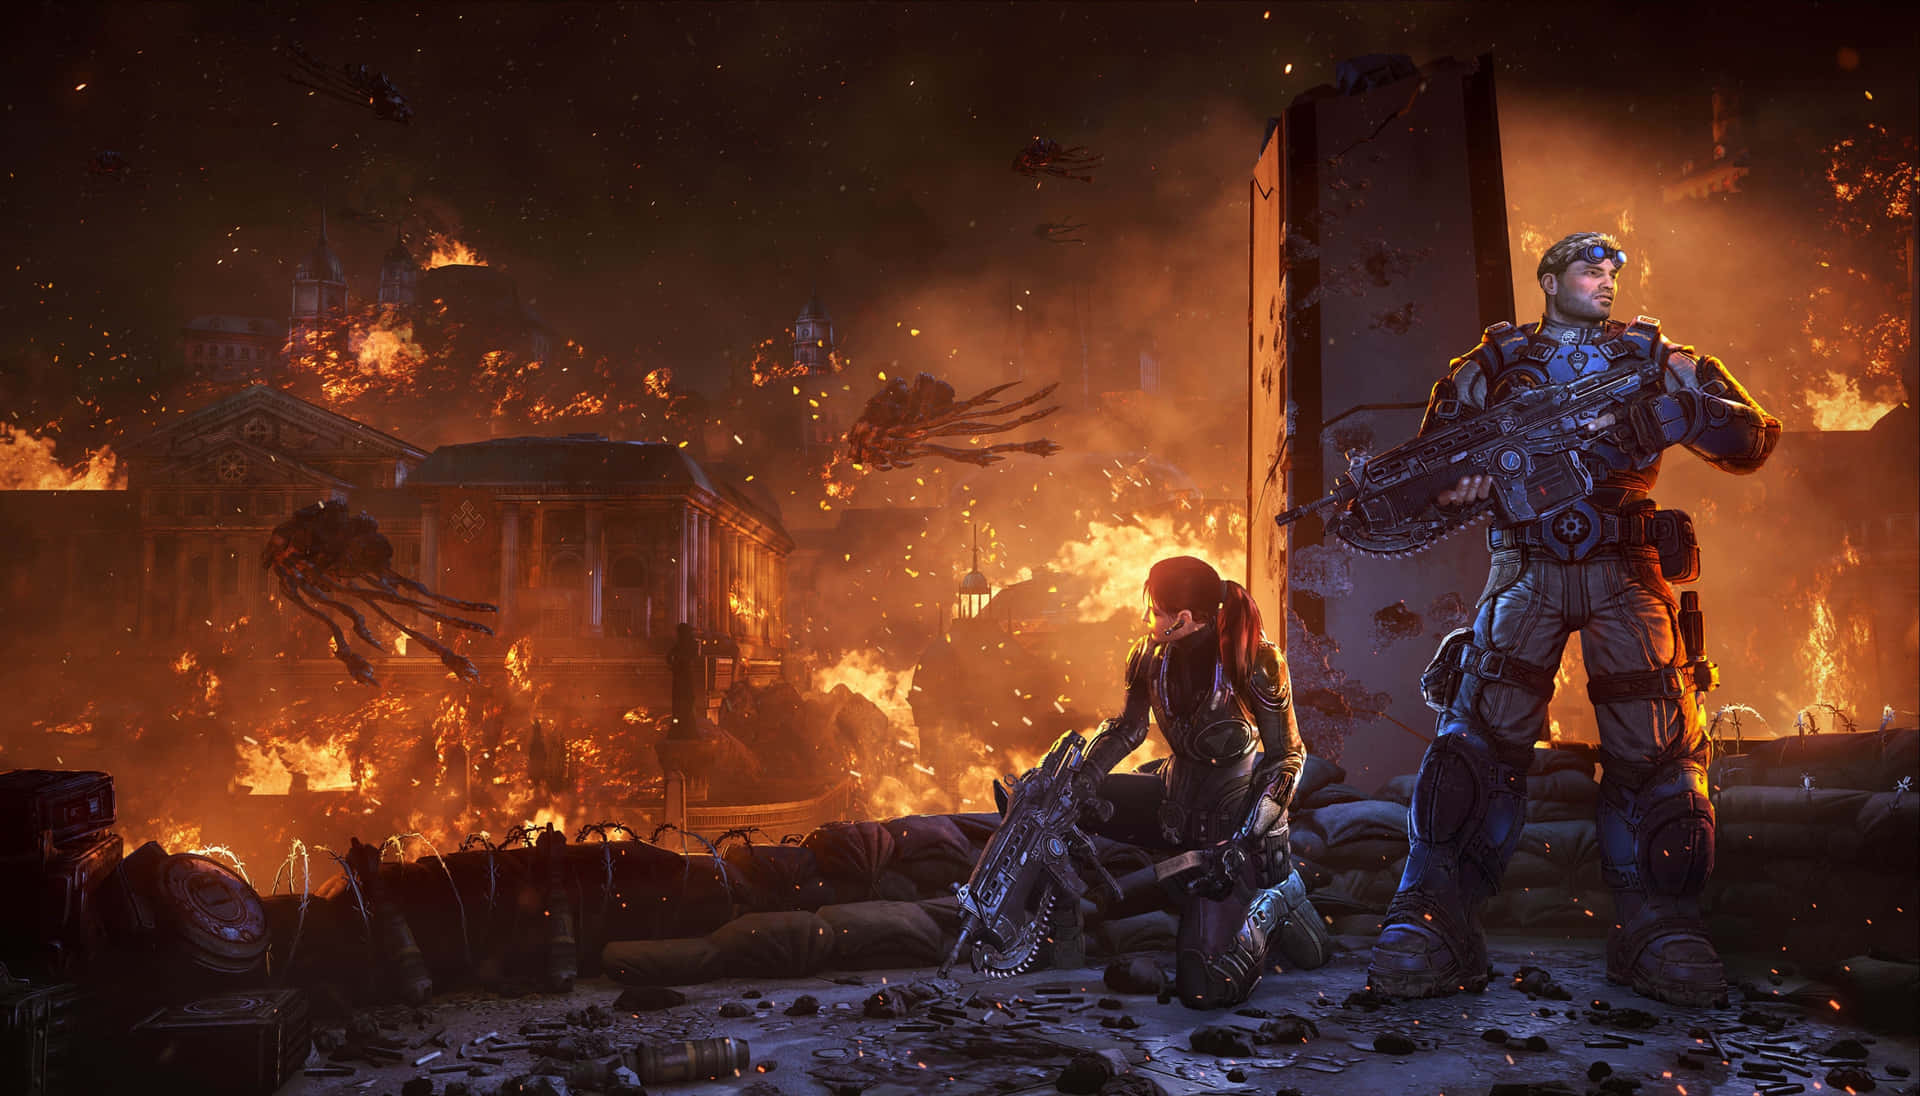 Fight the enemy in the final installment of Gears of War.